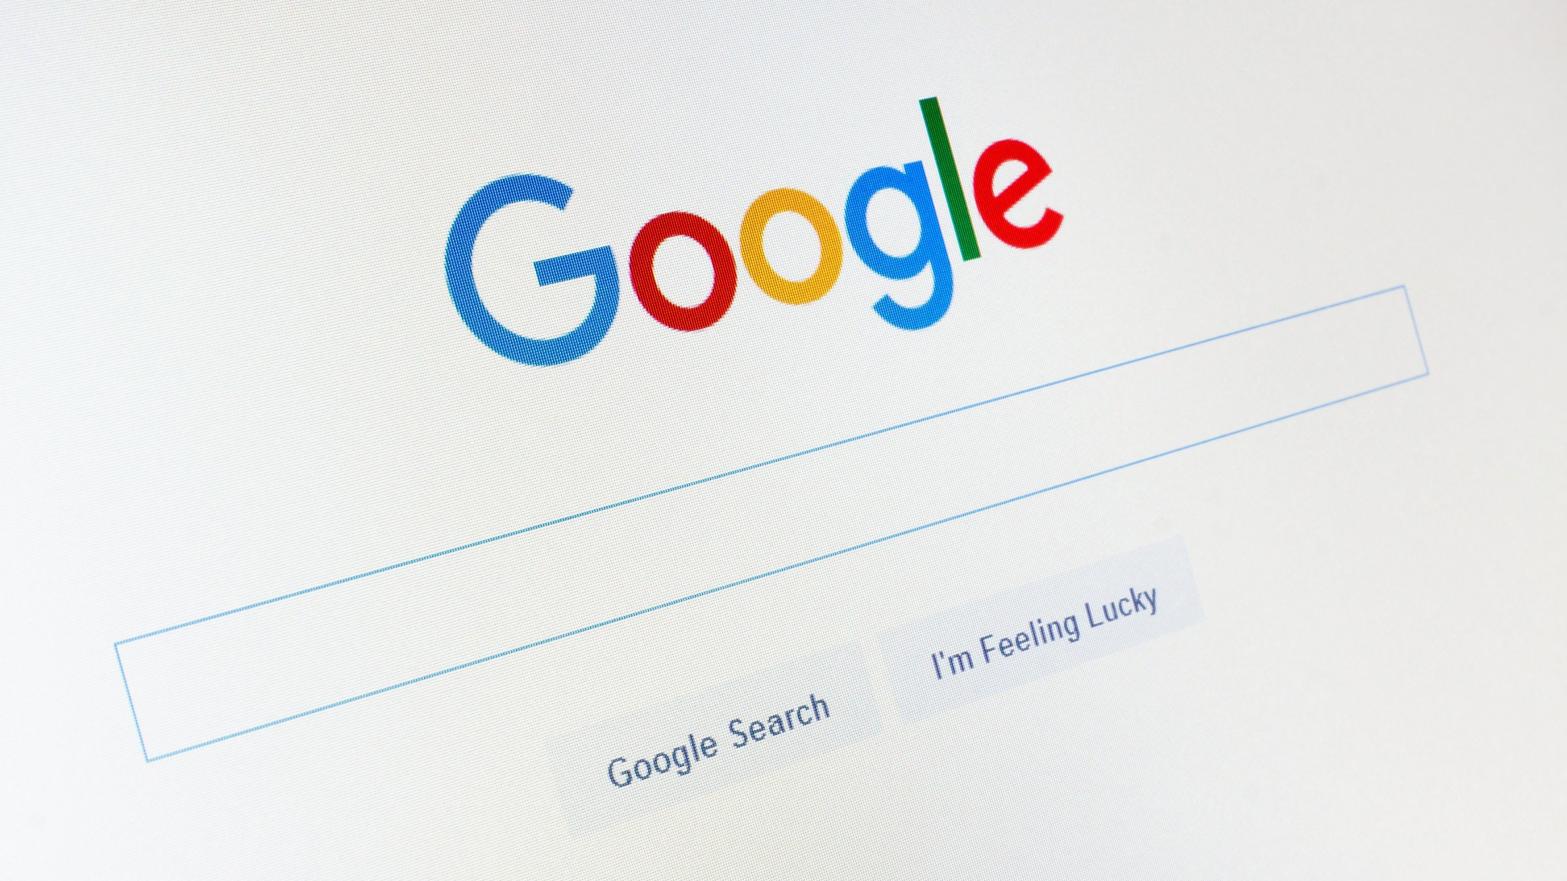 Google released a new tool to help you scrub its search results of certain sensitive information, like your phone number and email address. (Photo: Evan Lorne, Shutterstock)